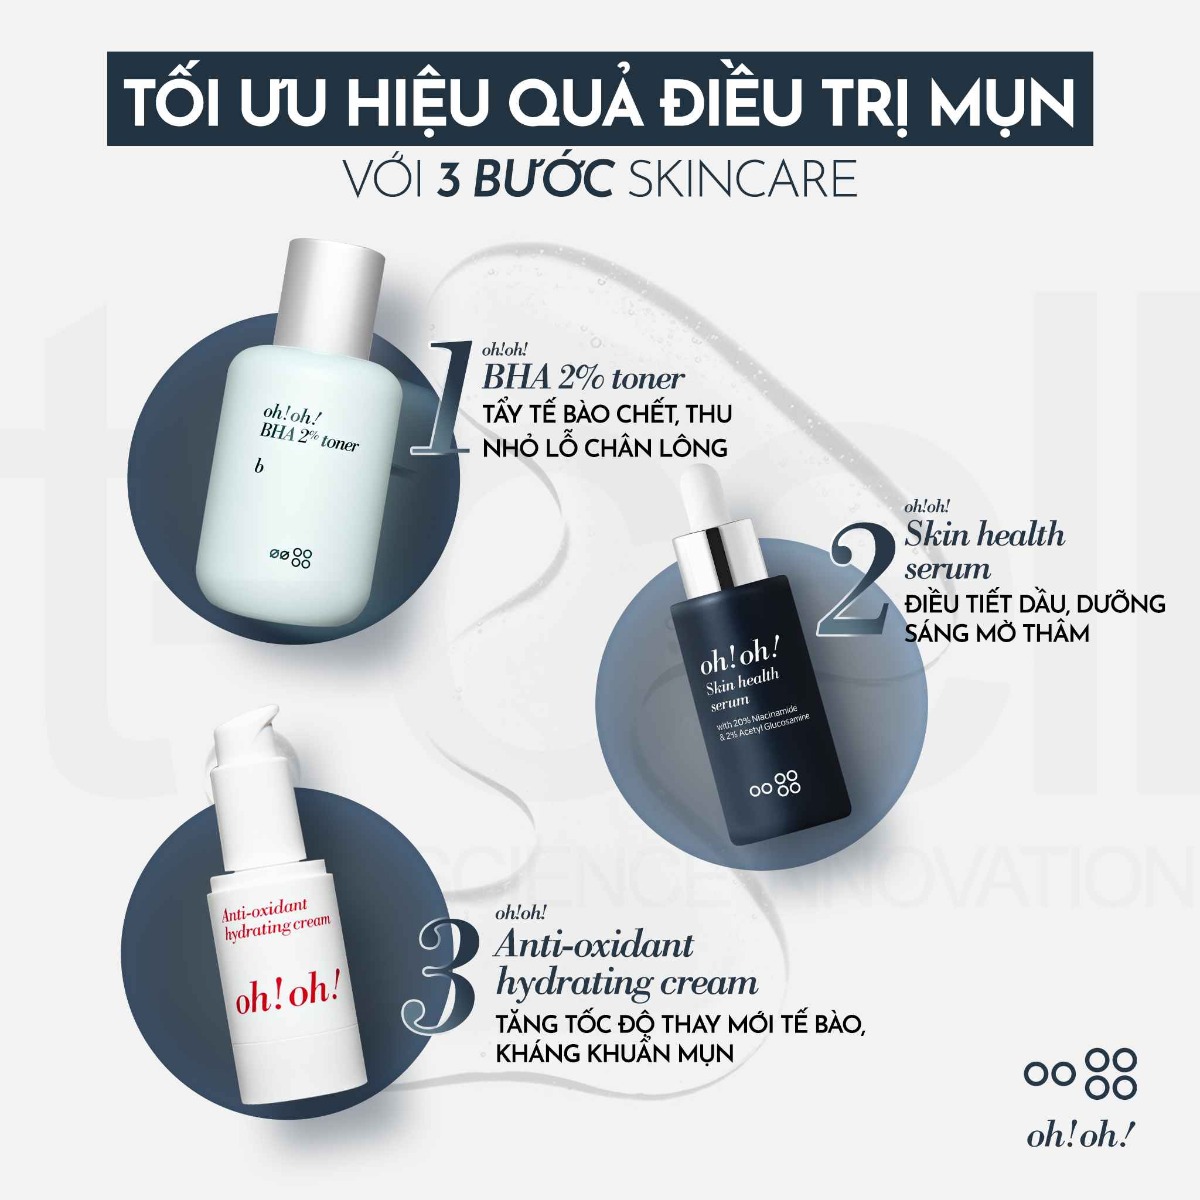 Tinh Chất oh!oh! Skin Health Serum (with 20% Niacinamide & 2% Acetyl Glucosamine) 